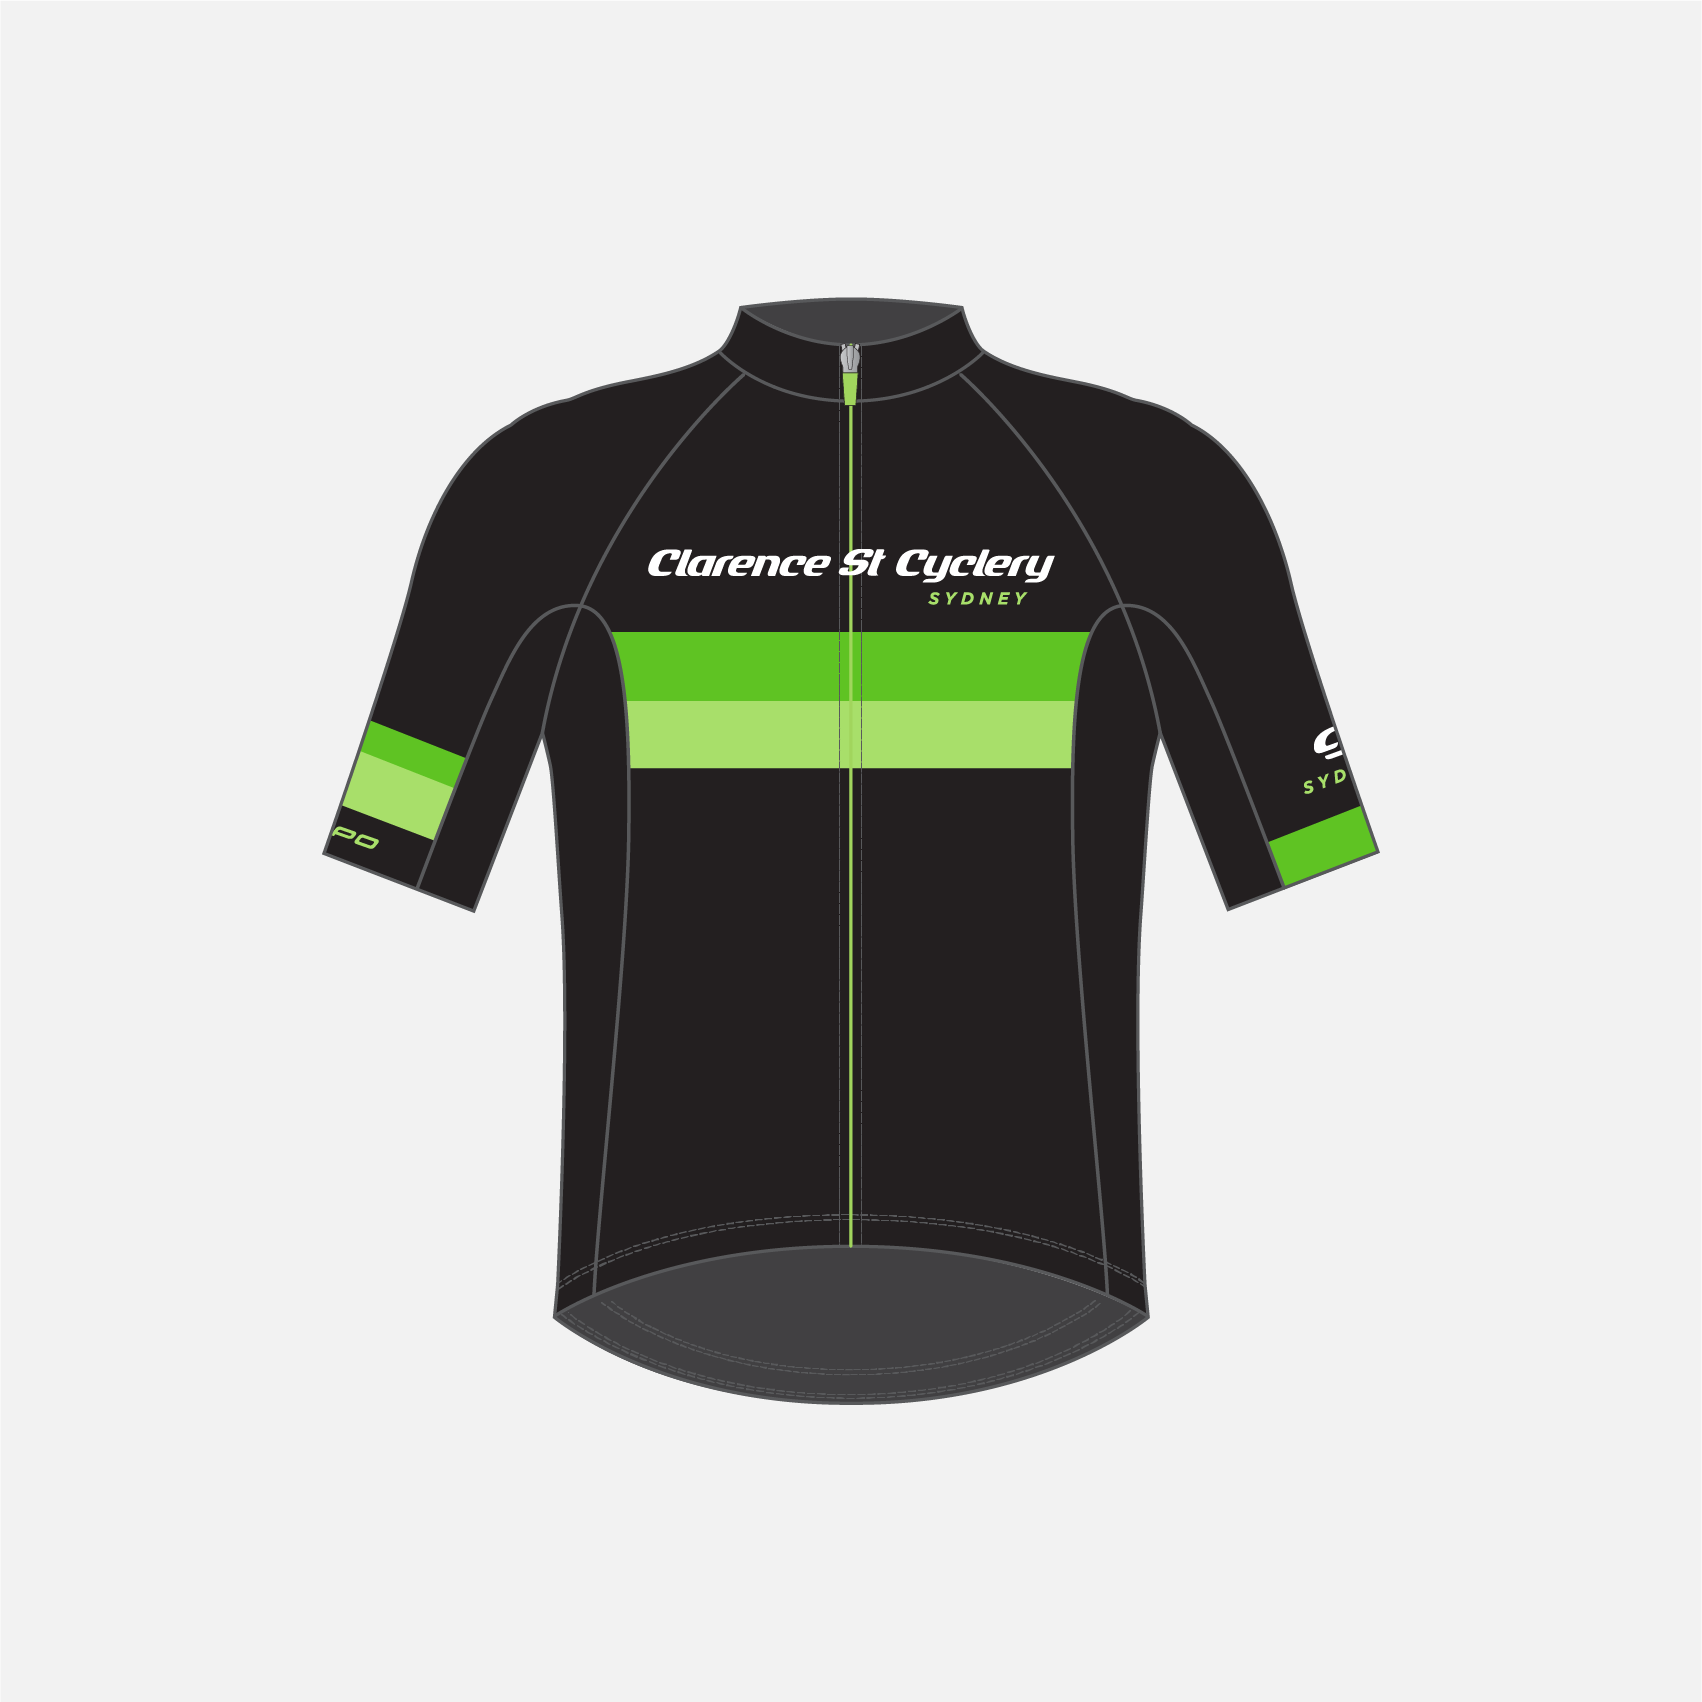 Clarence St Cyclery x Capo Shop Jersey Black